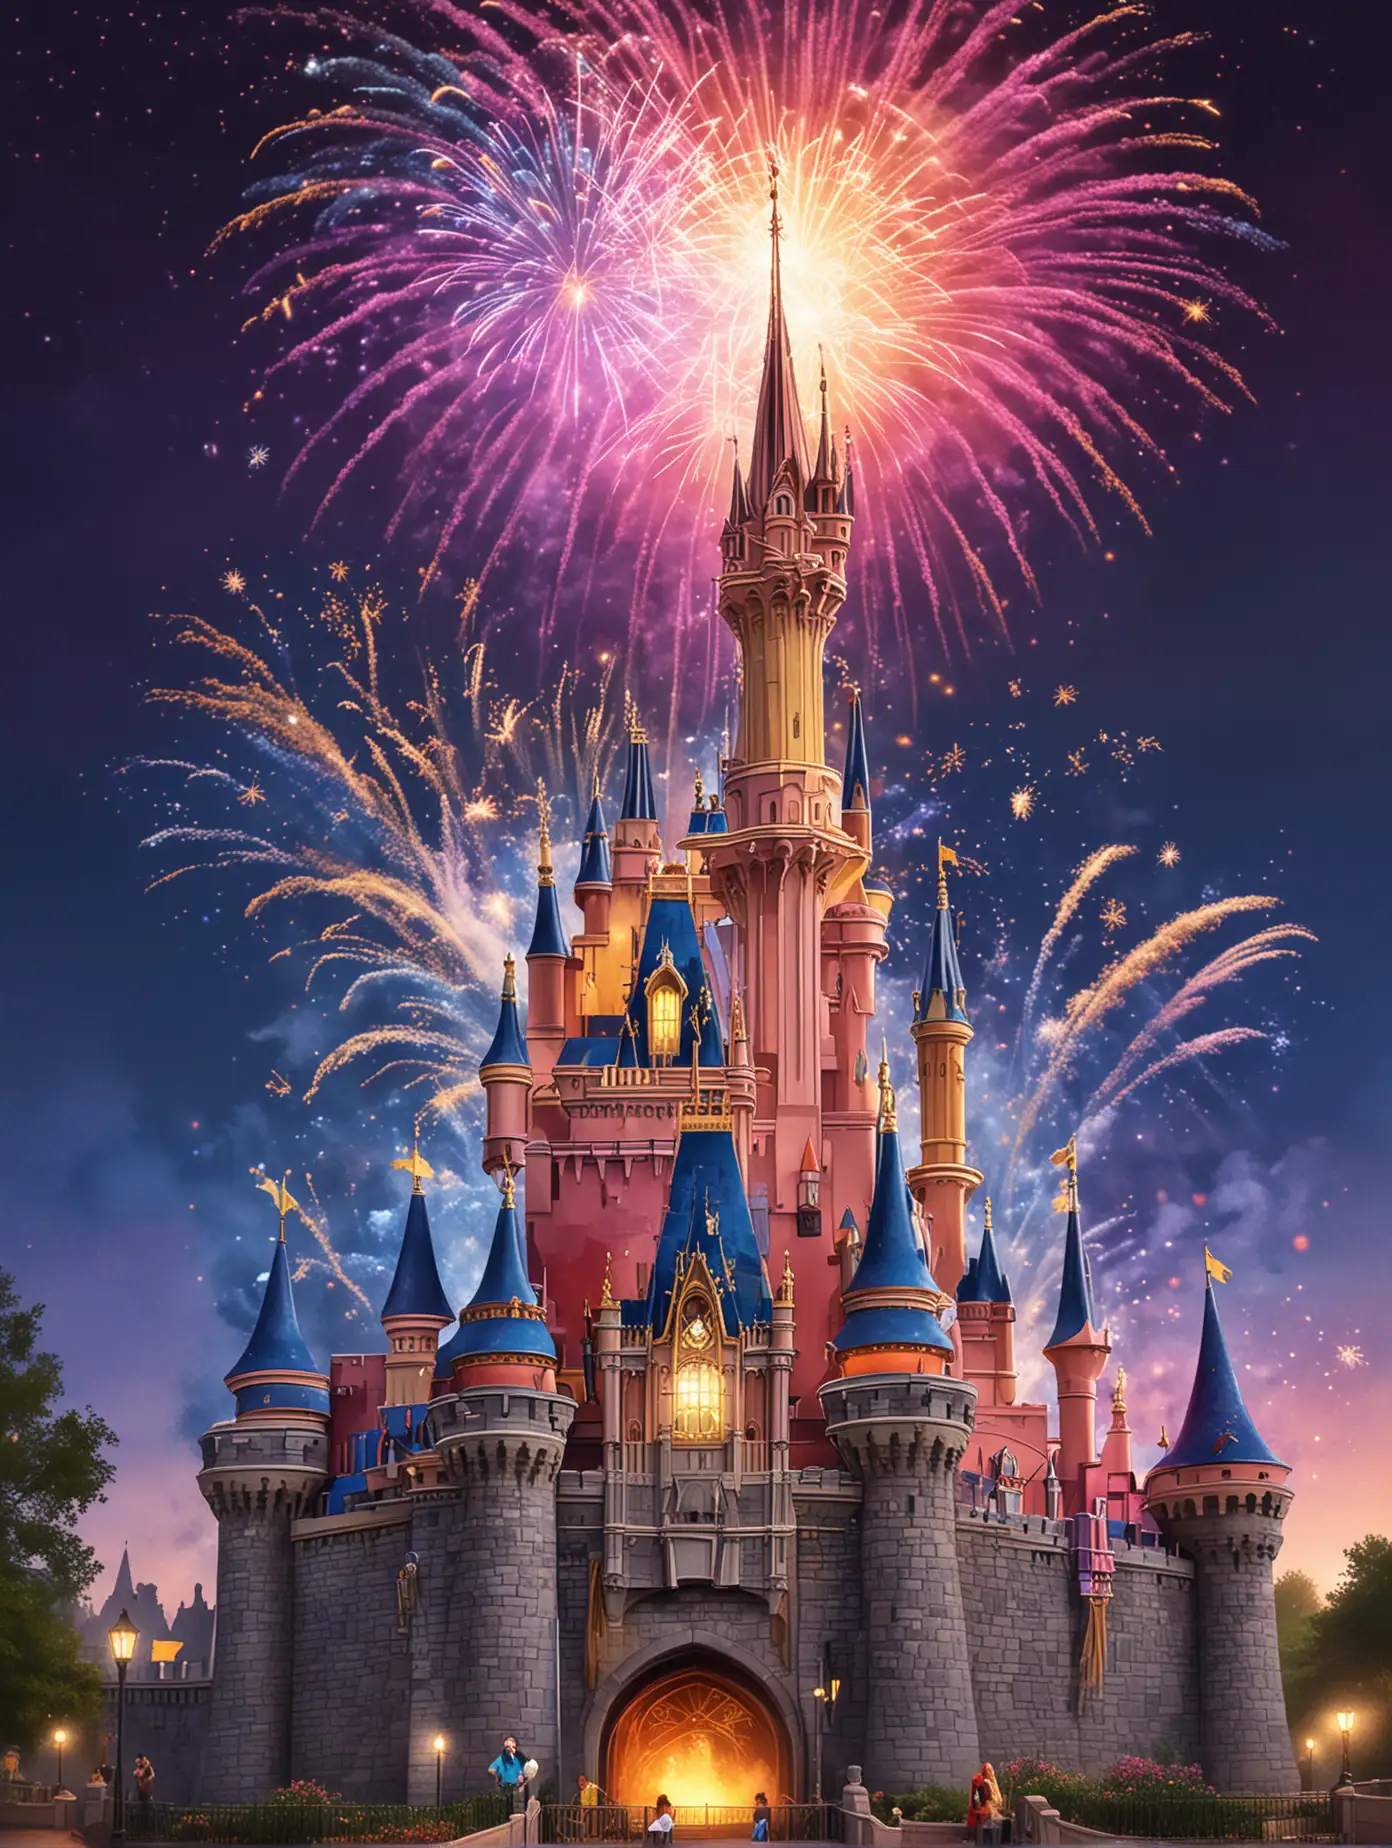 Sleeping Beautys Castle at Disneyland with Colorful Fireworks Display